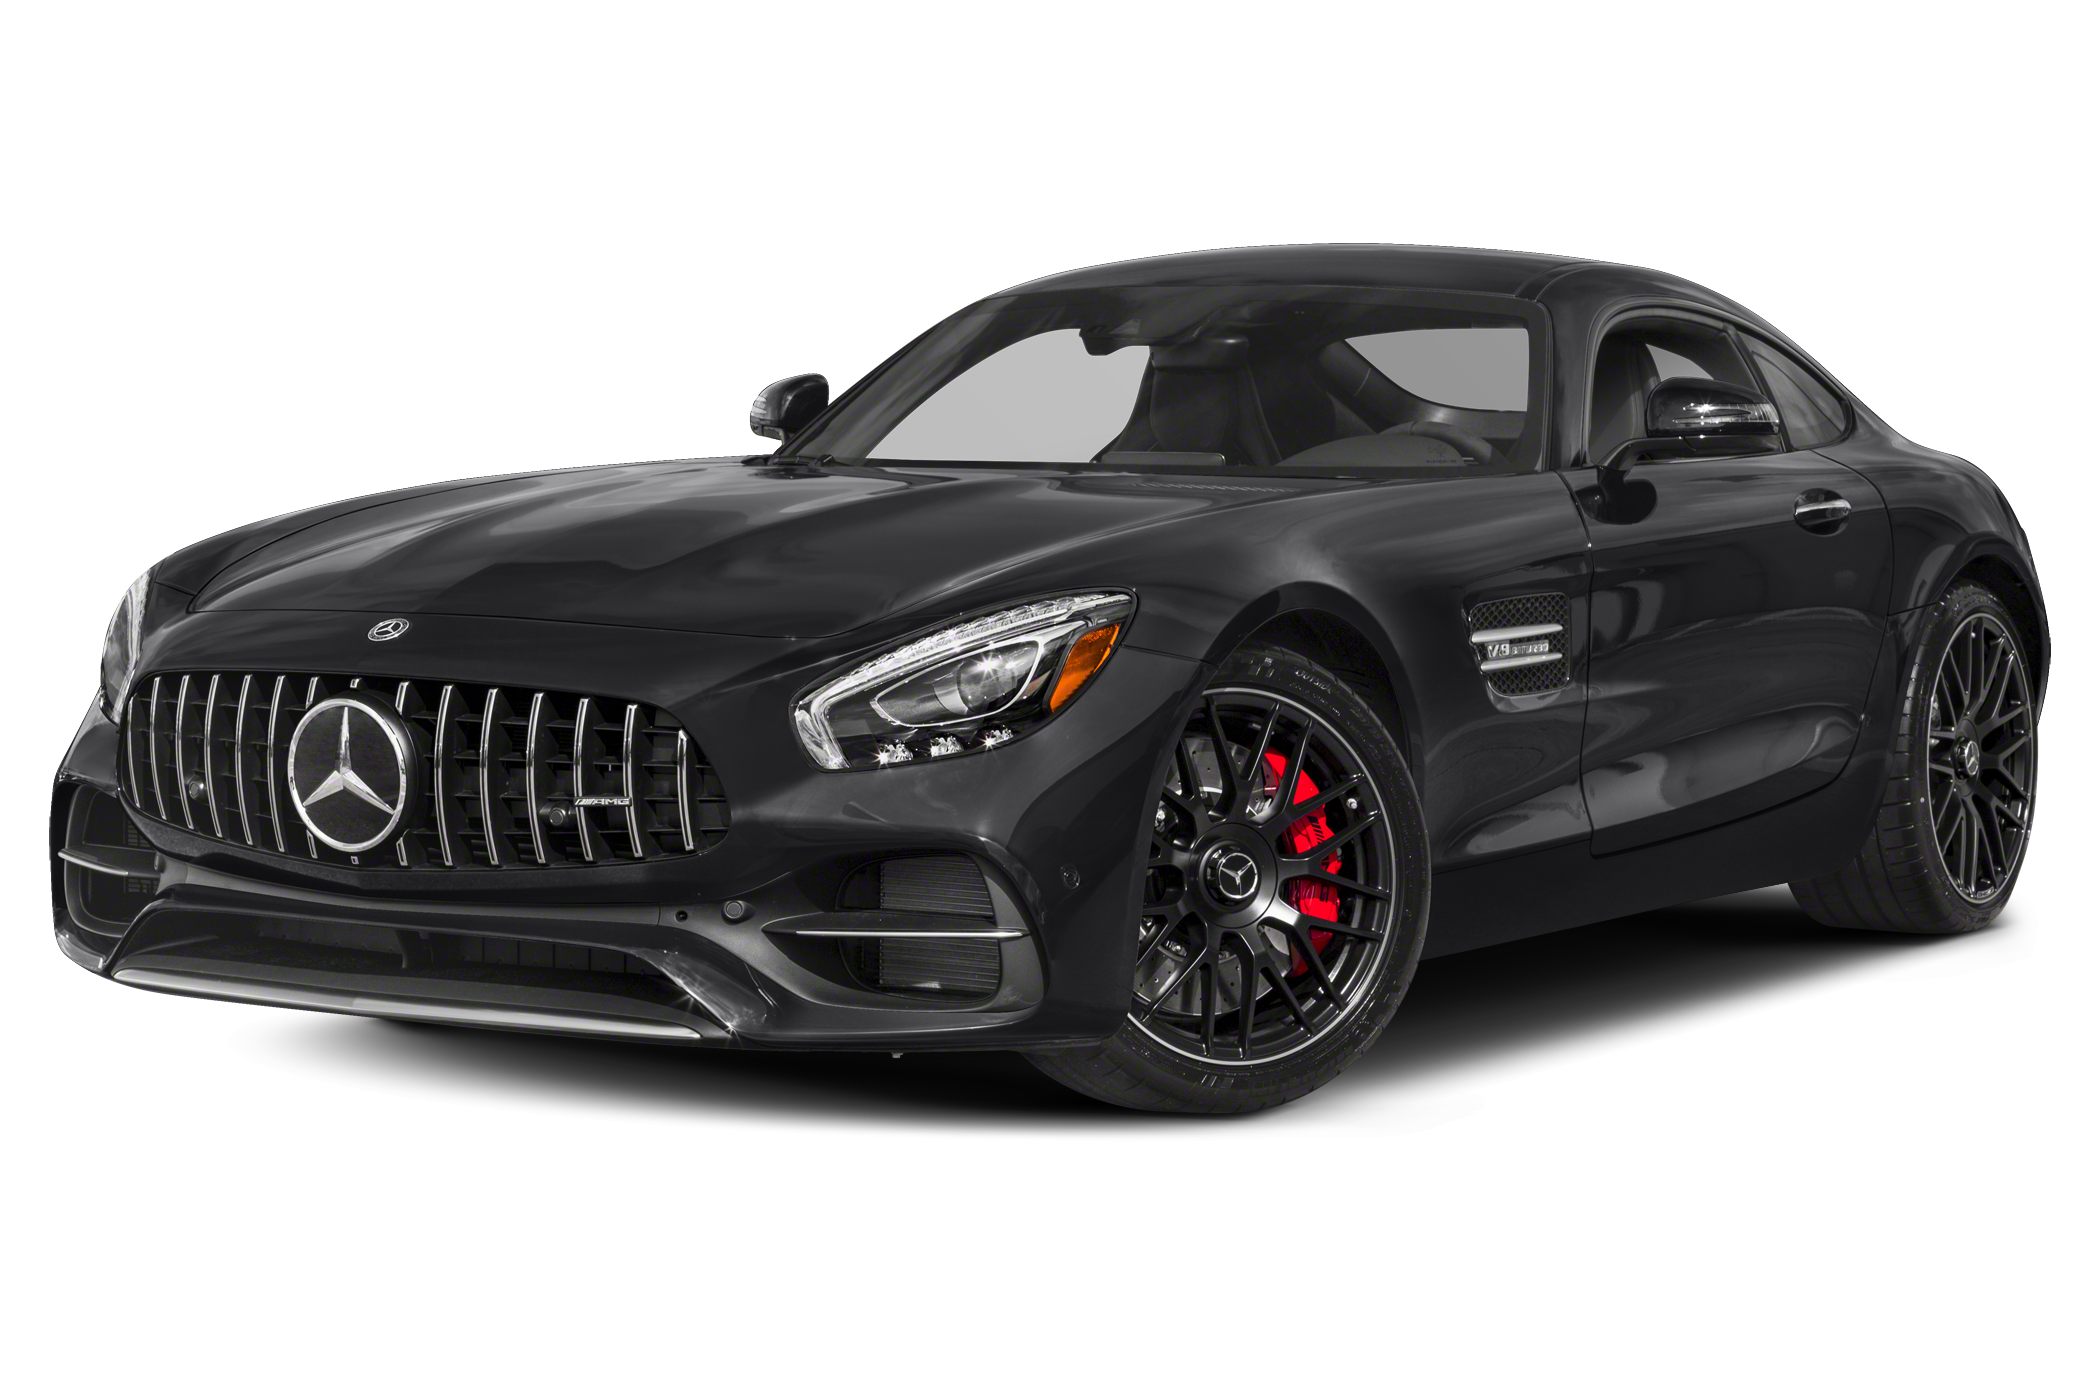 Mercedes-Benz AMG GT Car Mileage, Engine, Price, Space, Safety and Features